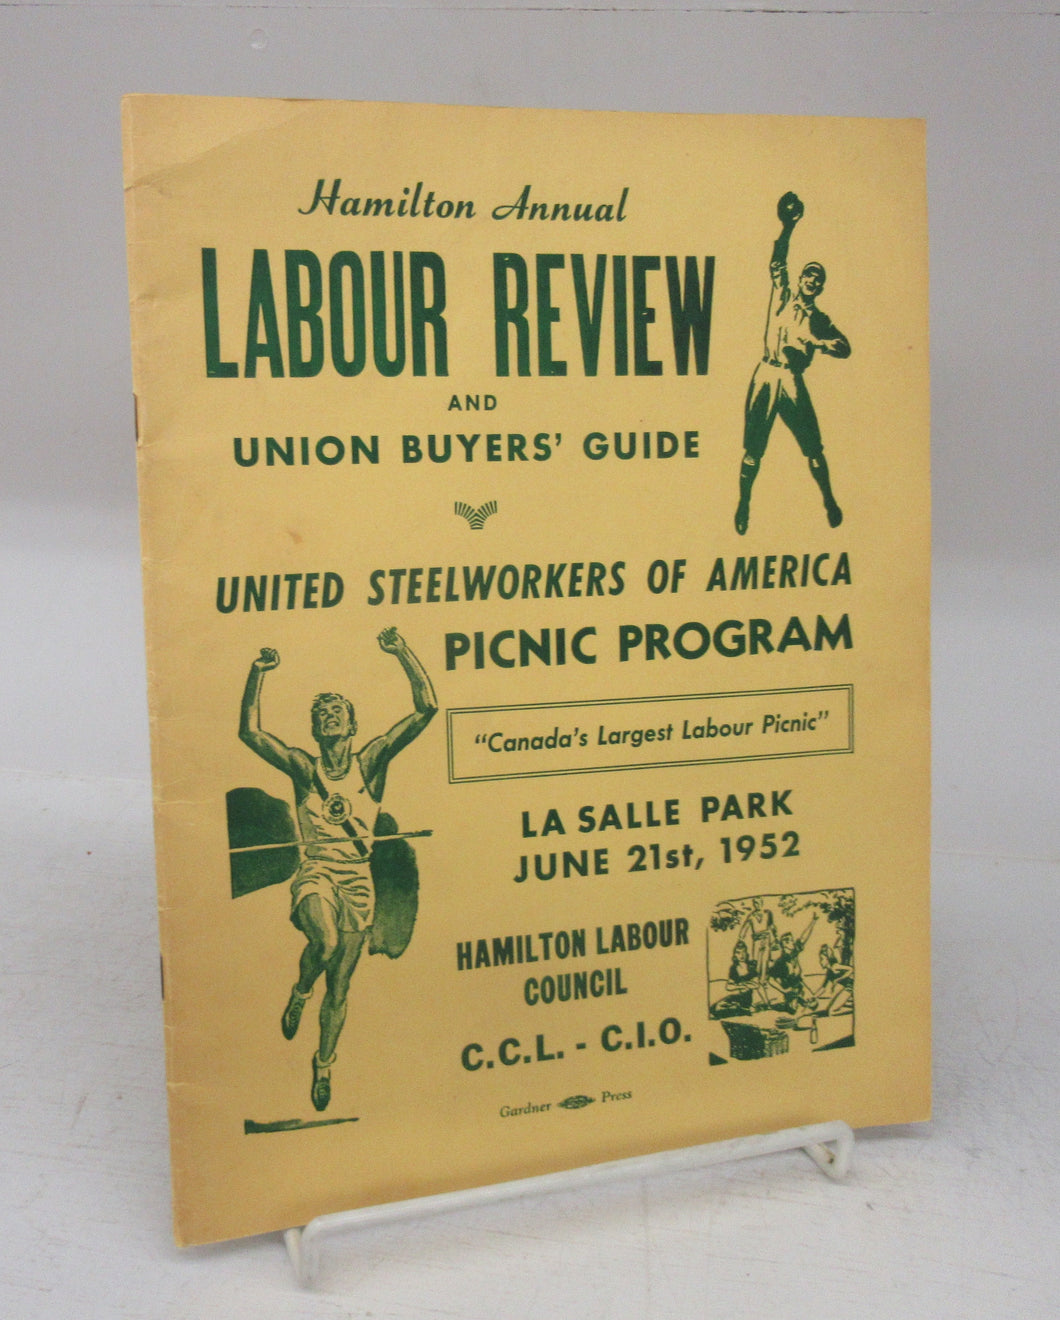 Hamilton Annual Labour Review and Union Buyers' Guide/United Steelworkers of America Picnic Program